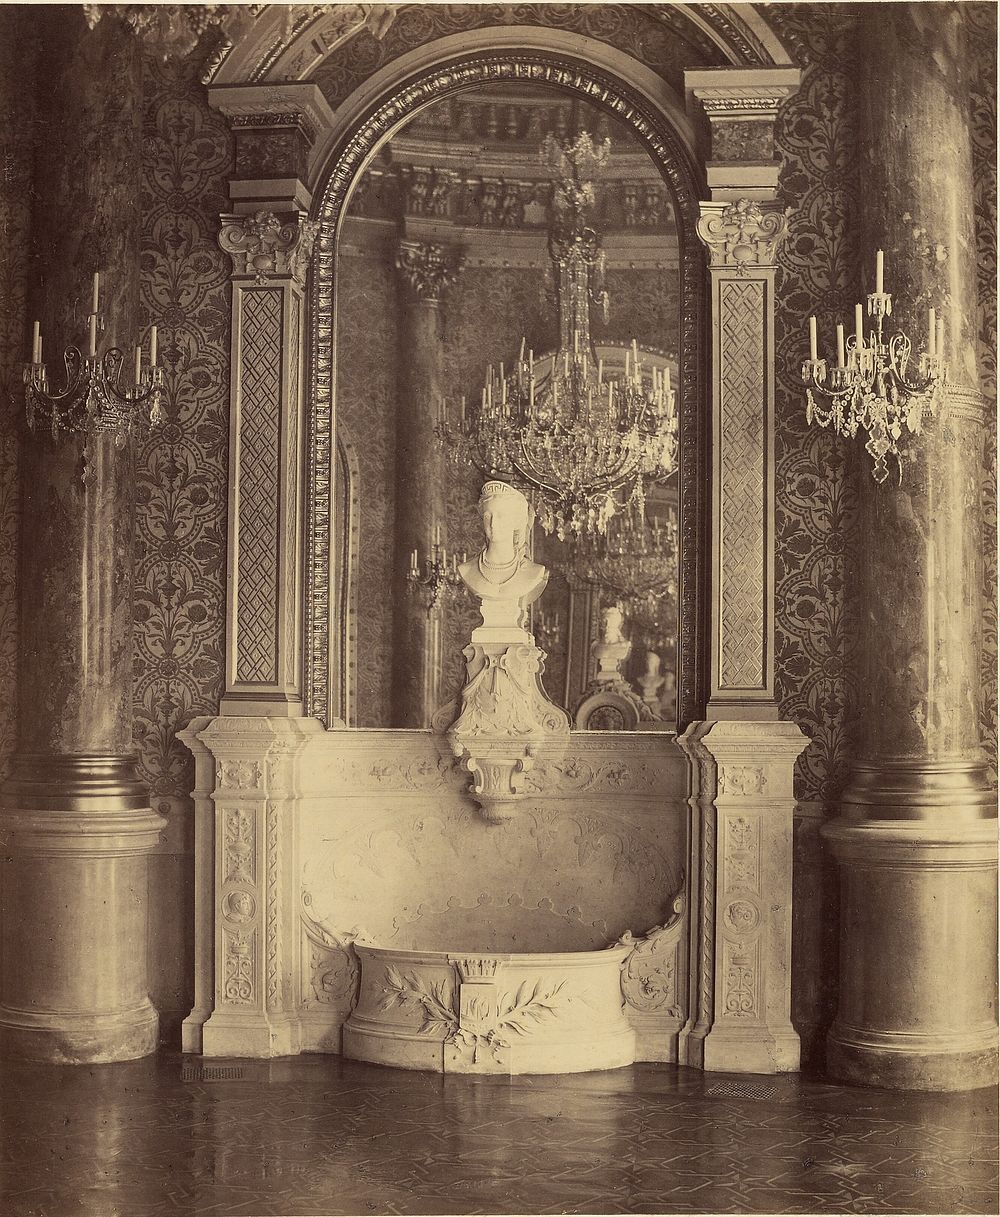 Interior of a Palace, probably the Hotel de Ville, Paris by Charles Marville